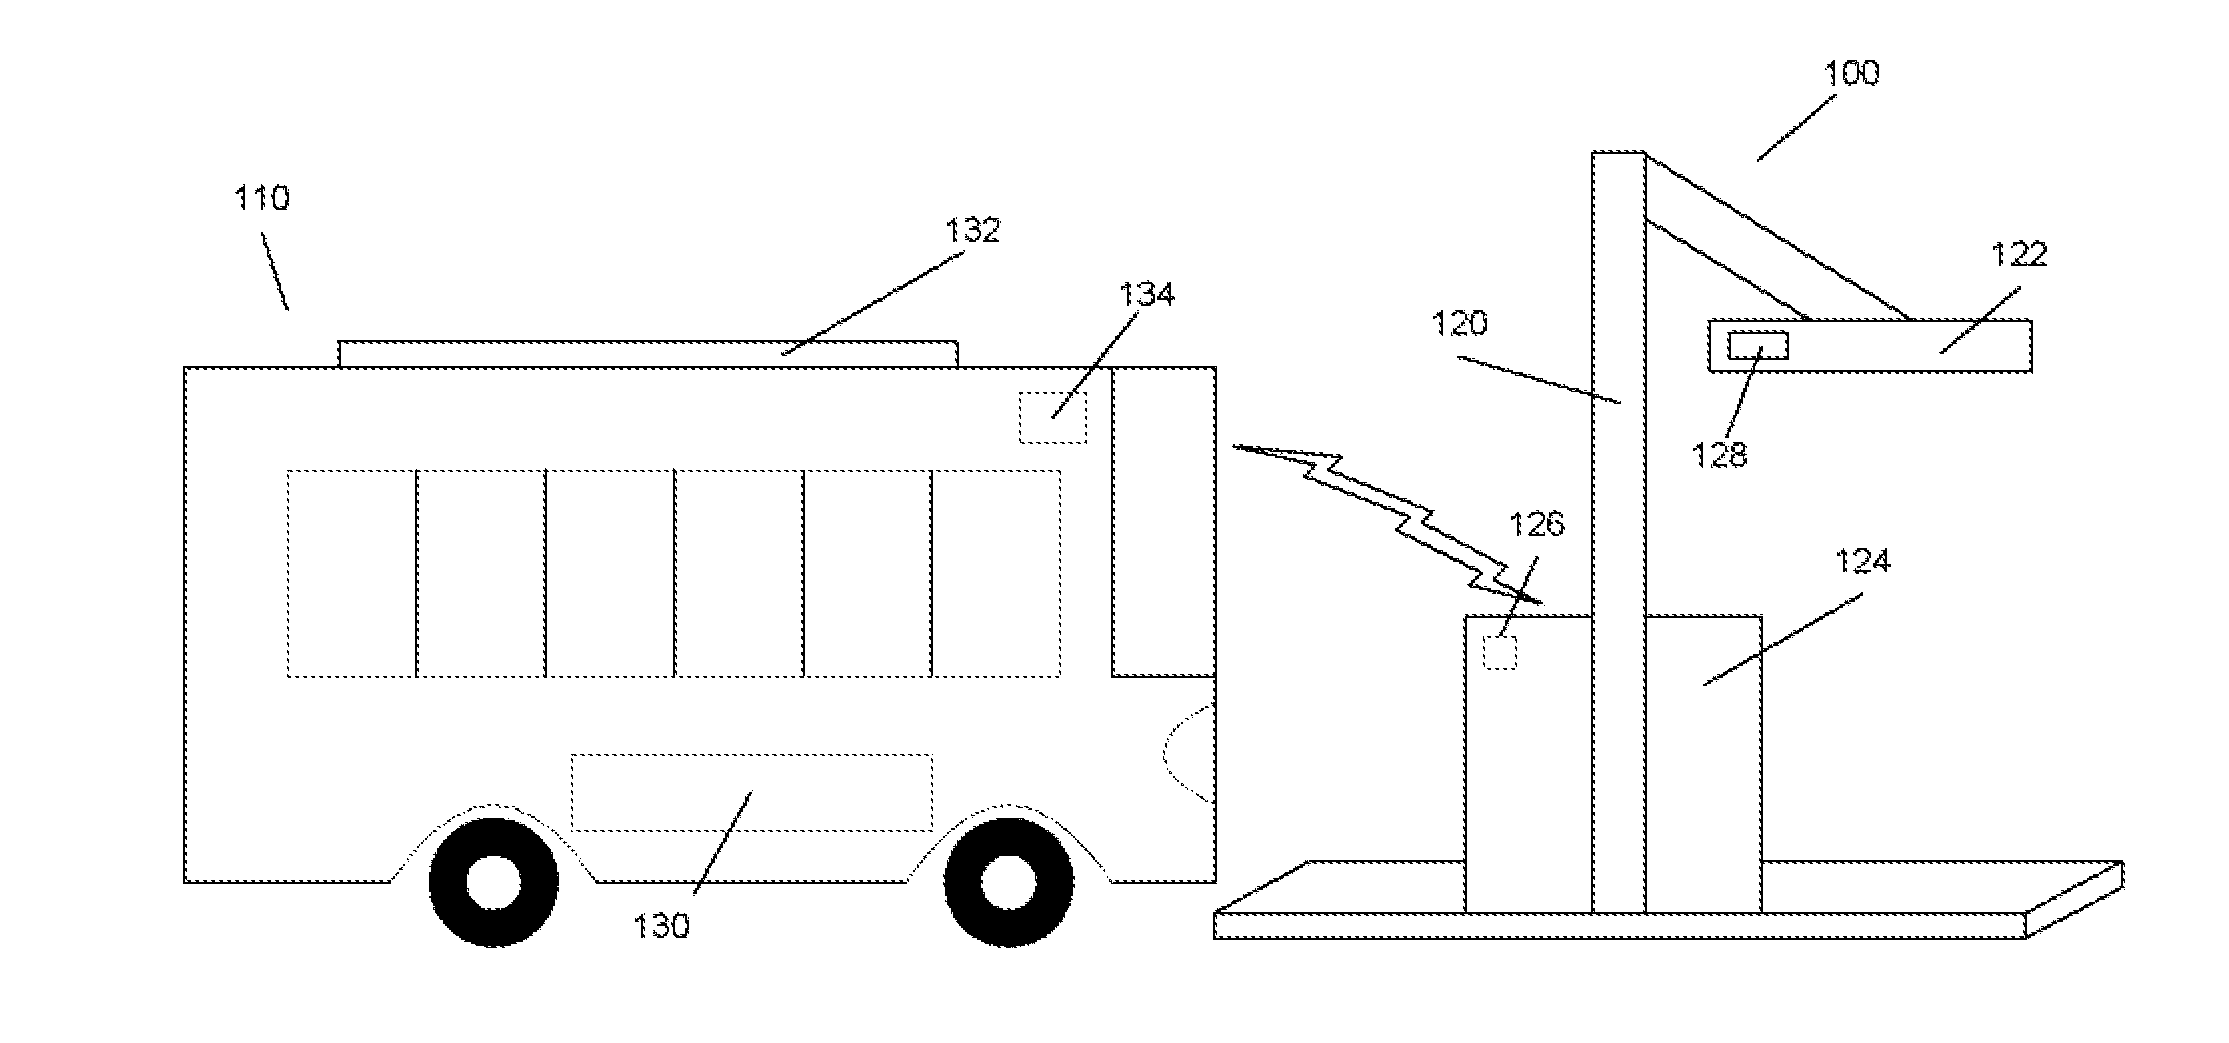 Systems and methods for automatic connection and charging of an electric vehicle at a charging station